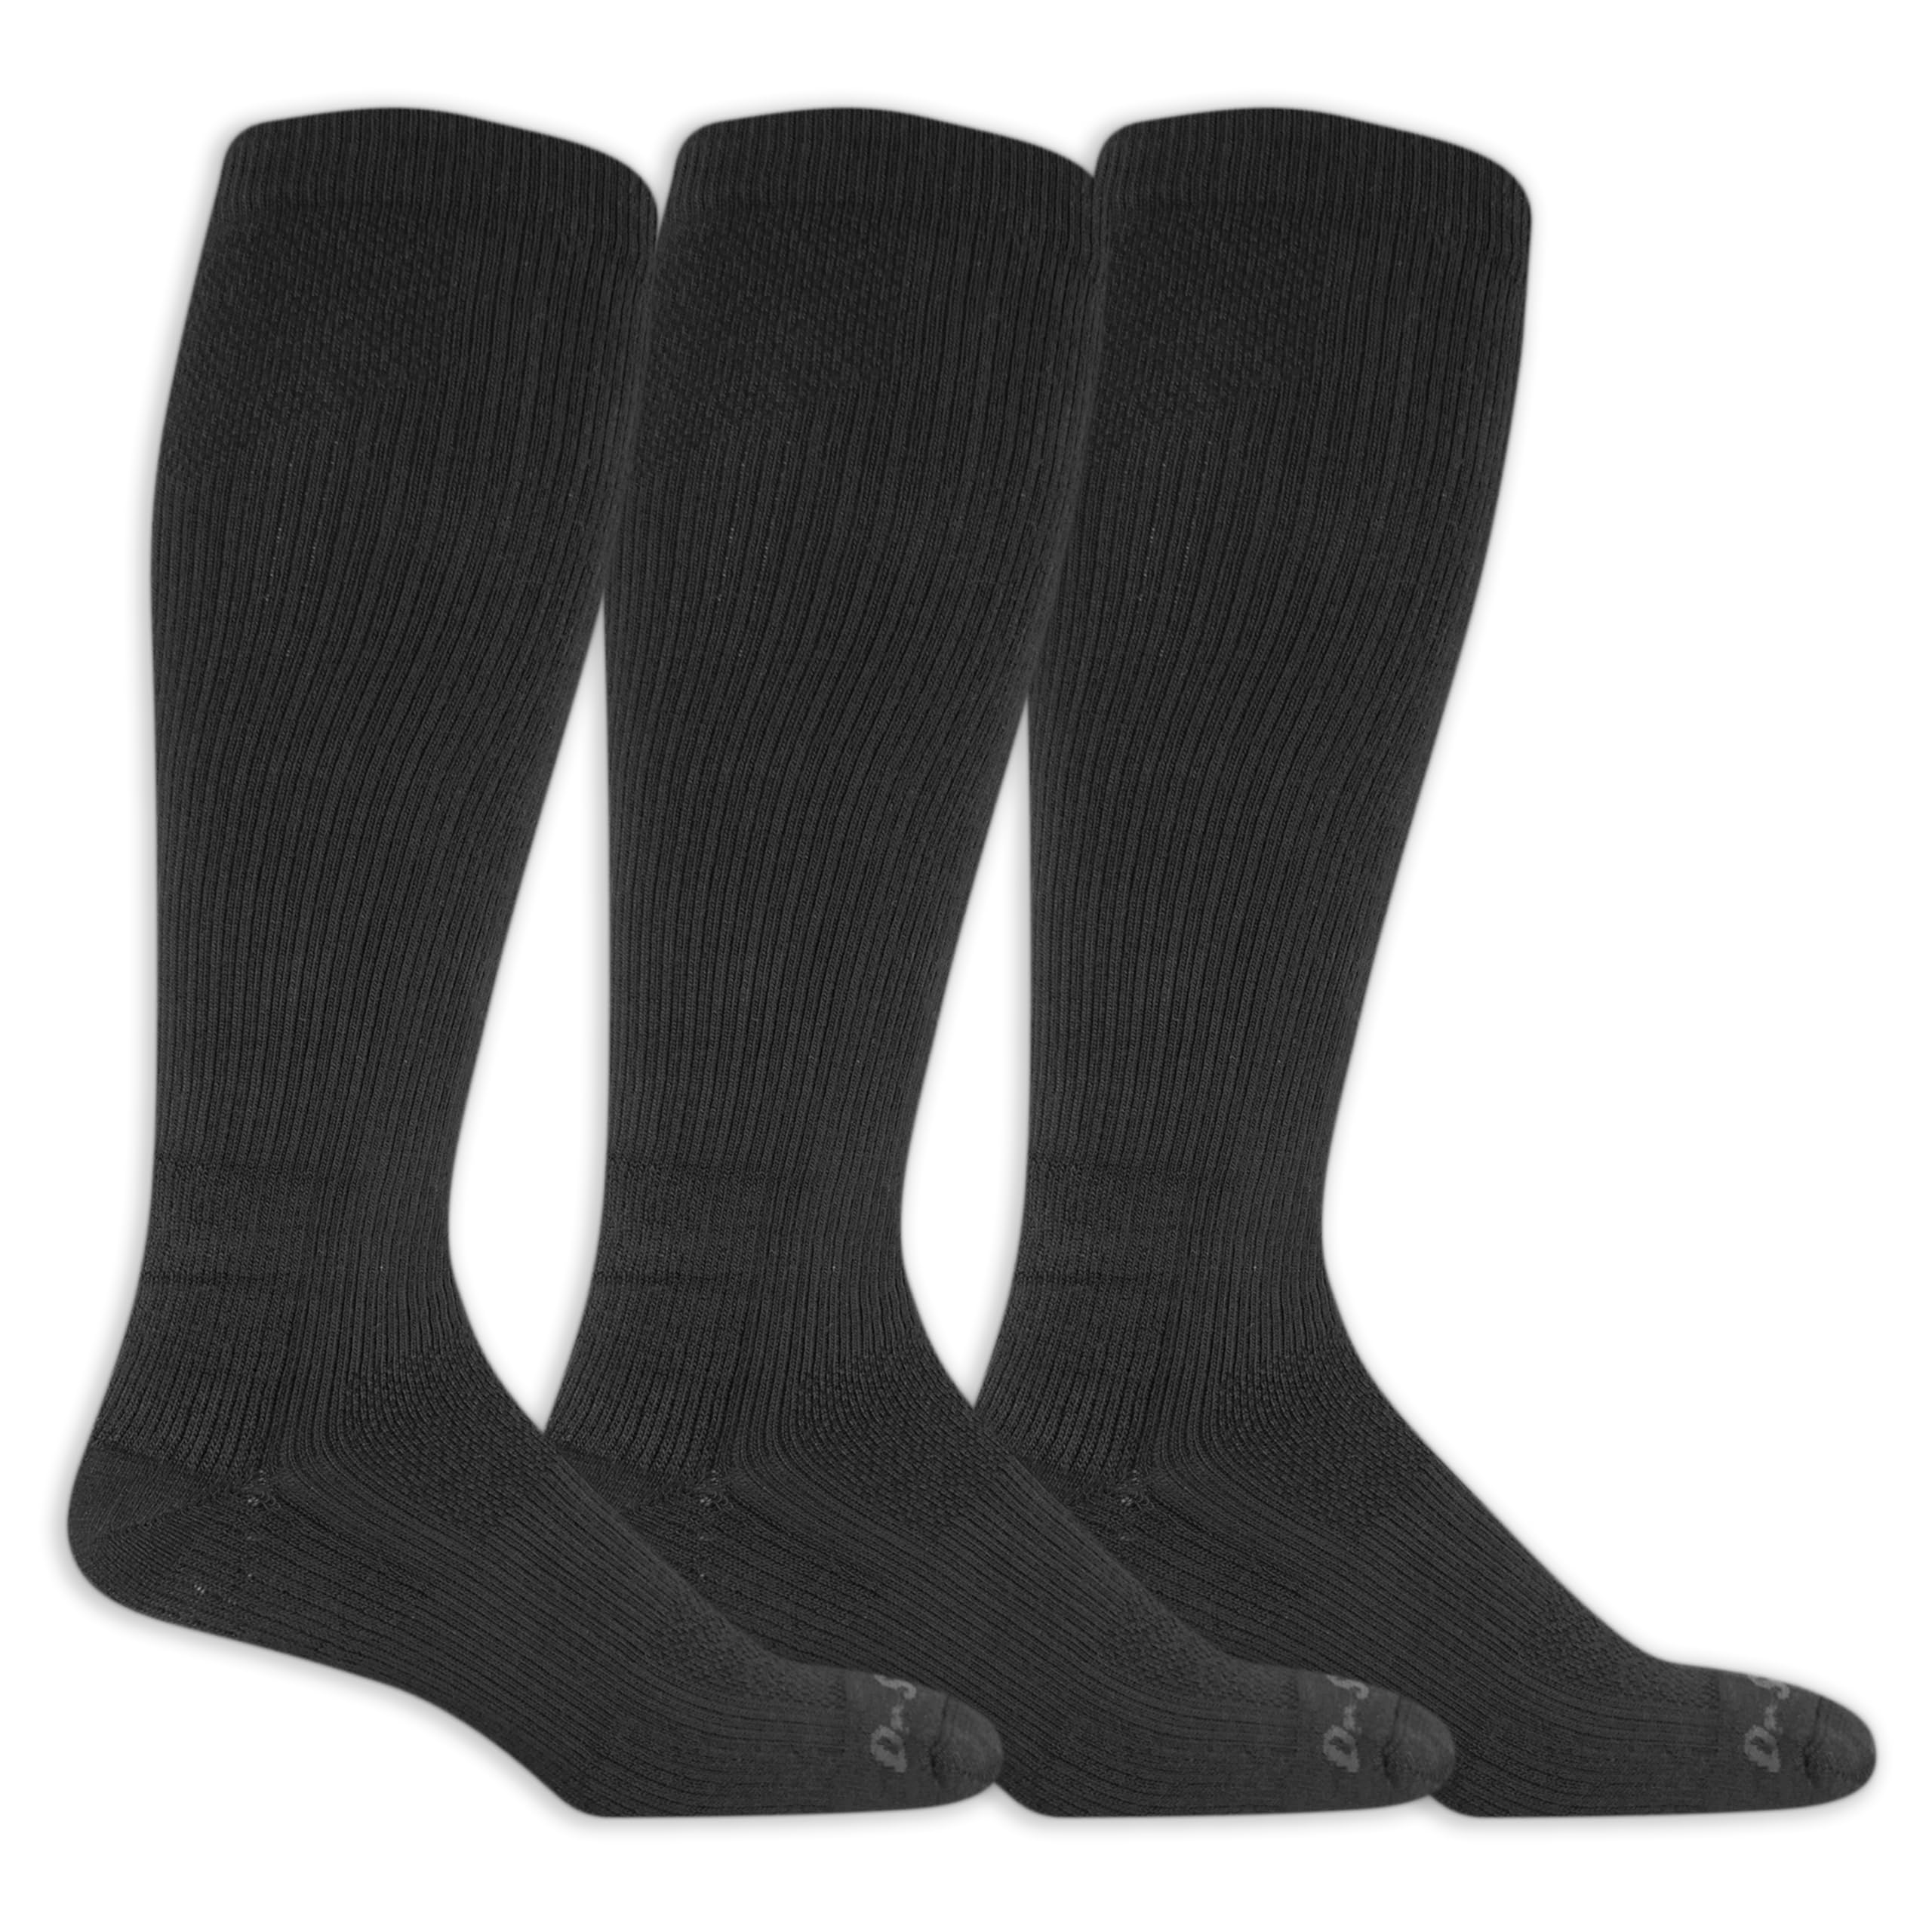 Dr. Scholl's Mens Athletic & Work Compression Over The Calf - 1 3 Pair Packs Moisture Management Sock, Black, 13-15 US